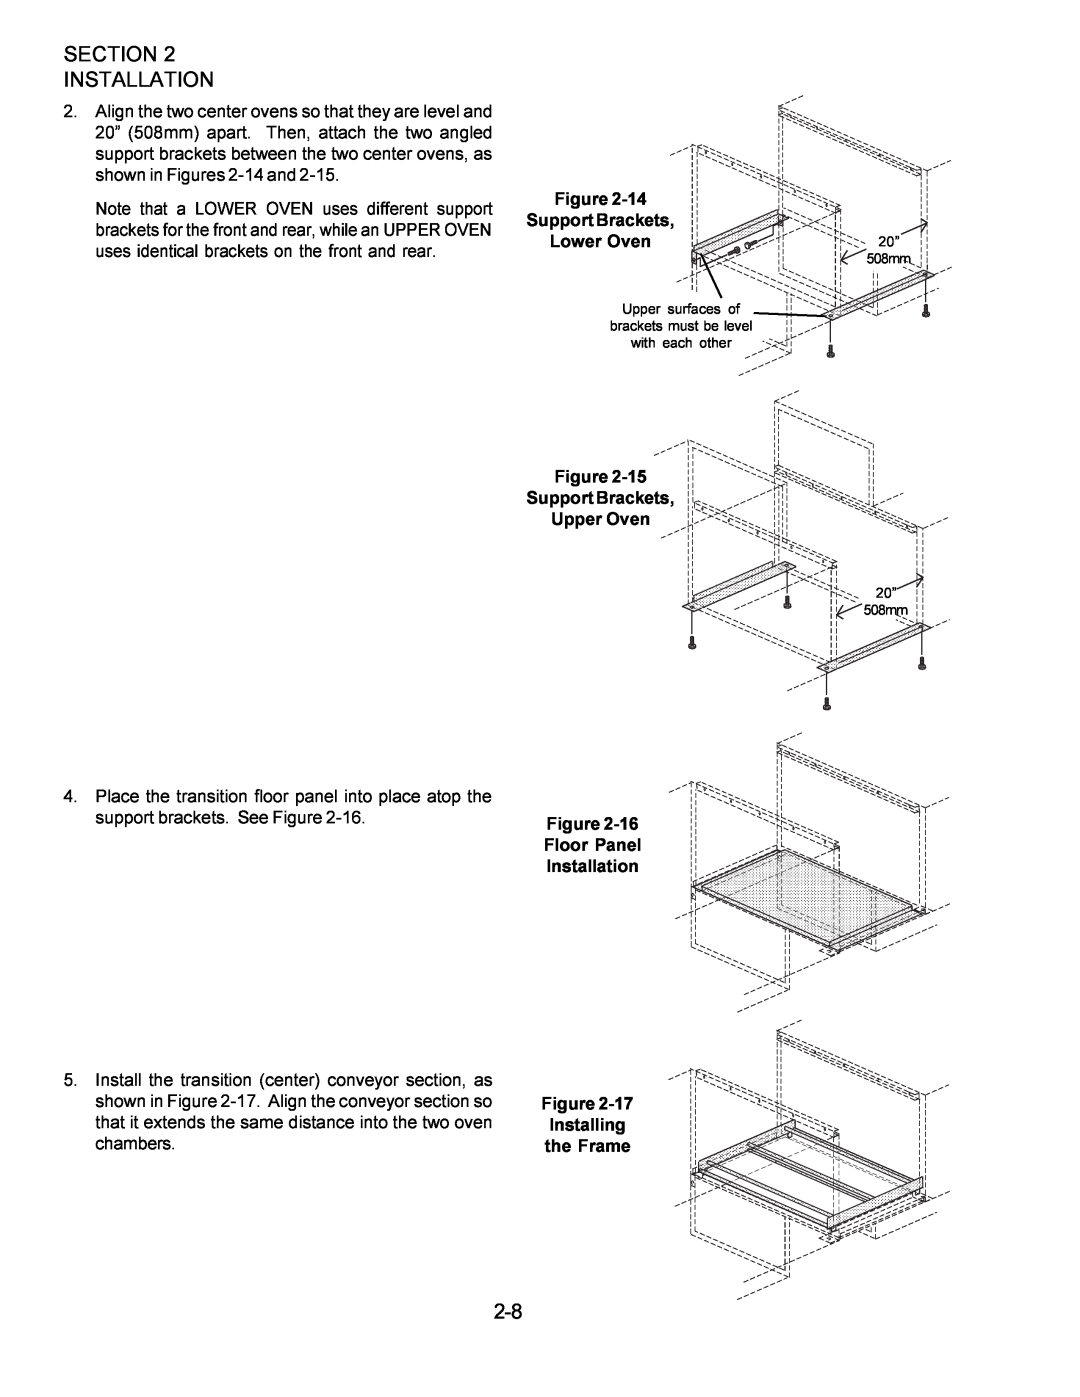 Middleby Marshall PS360WB Support Brackets Lower Oven 20”, Support Brackets Upper Oven, Floor Panel Installation 